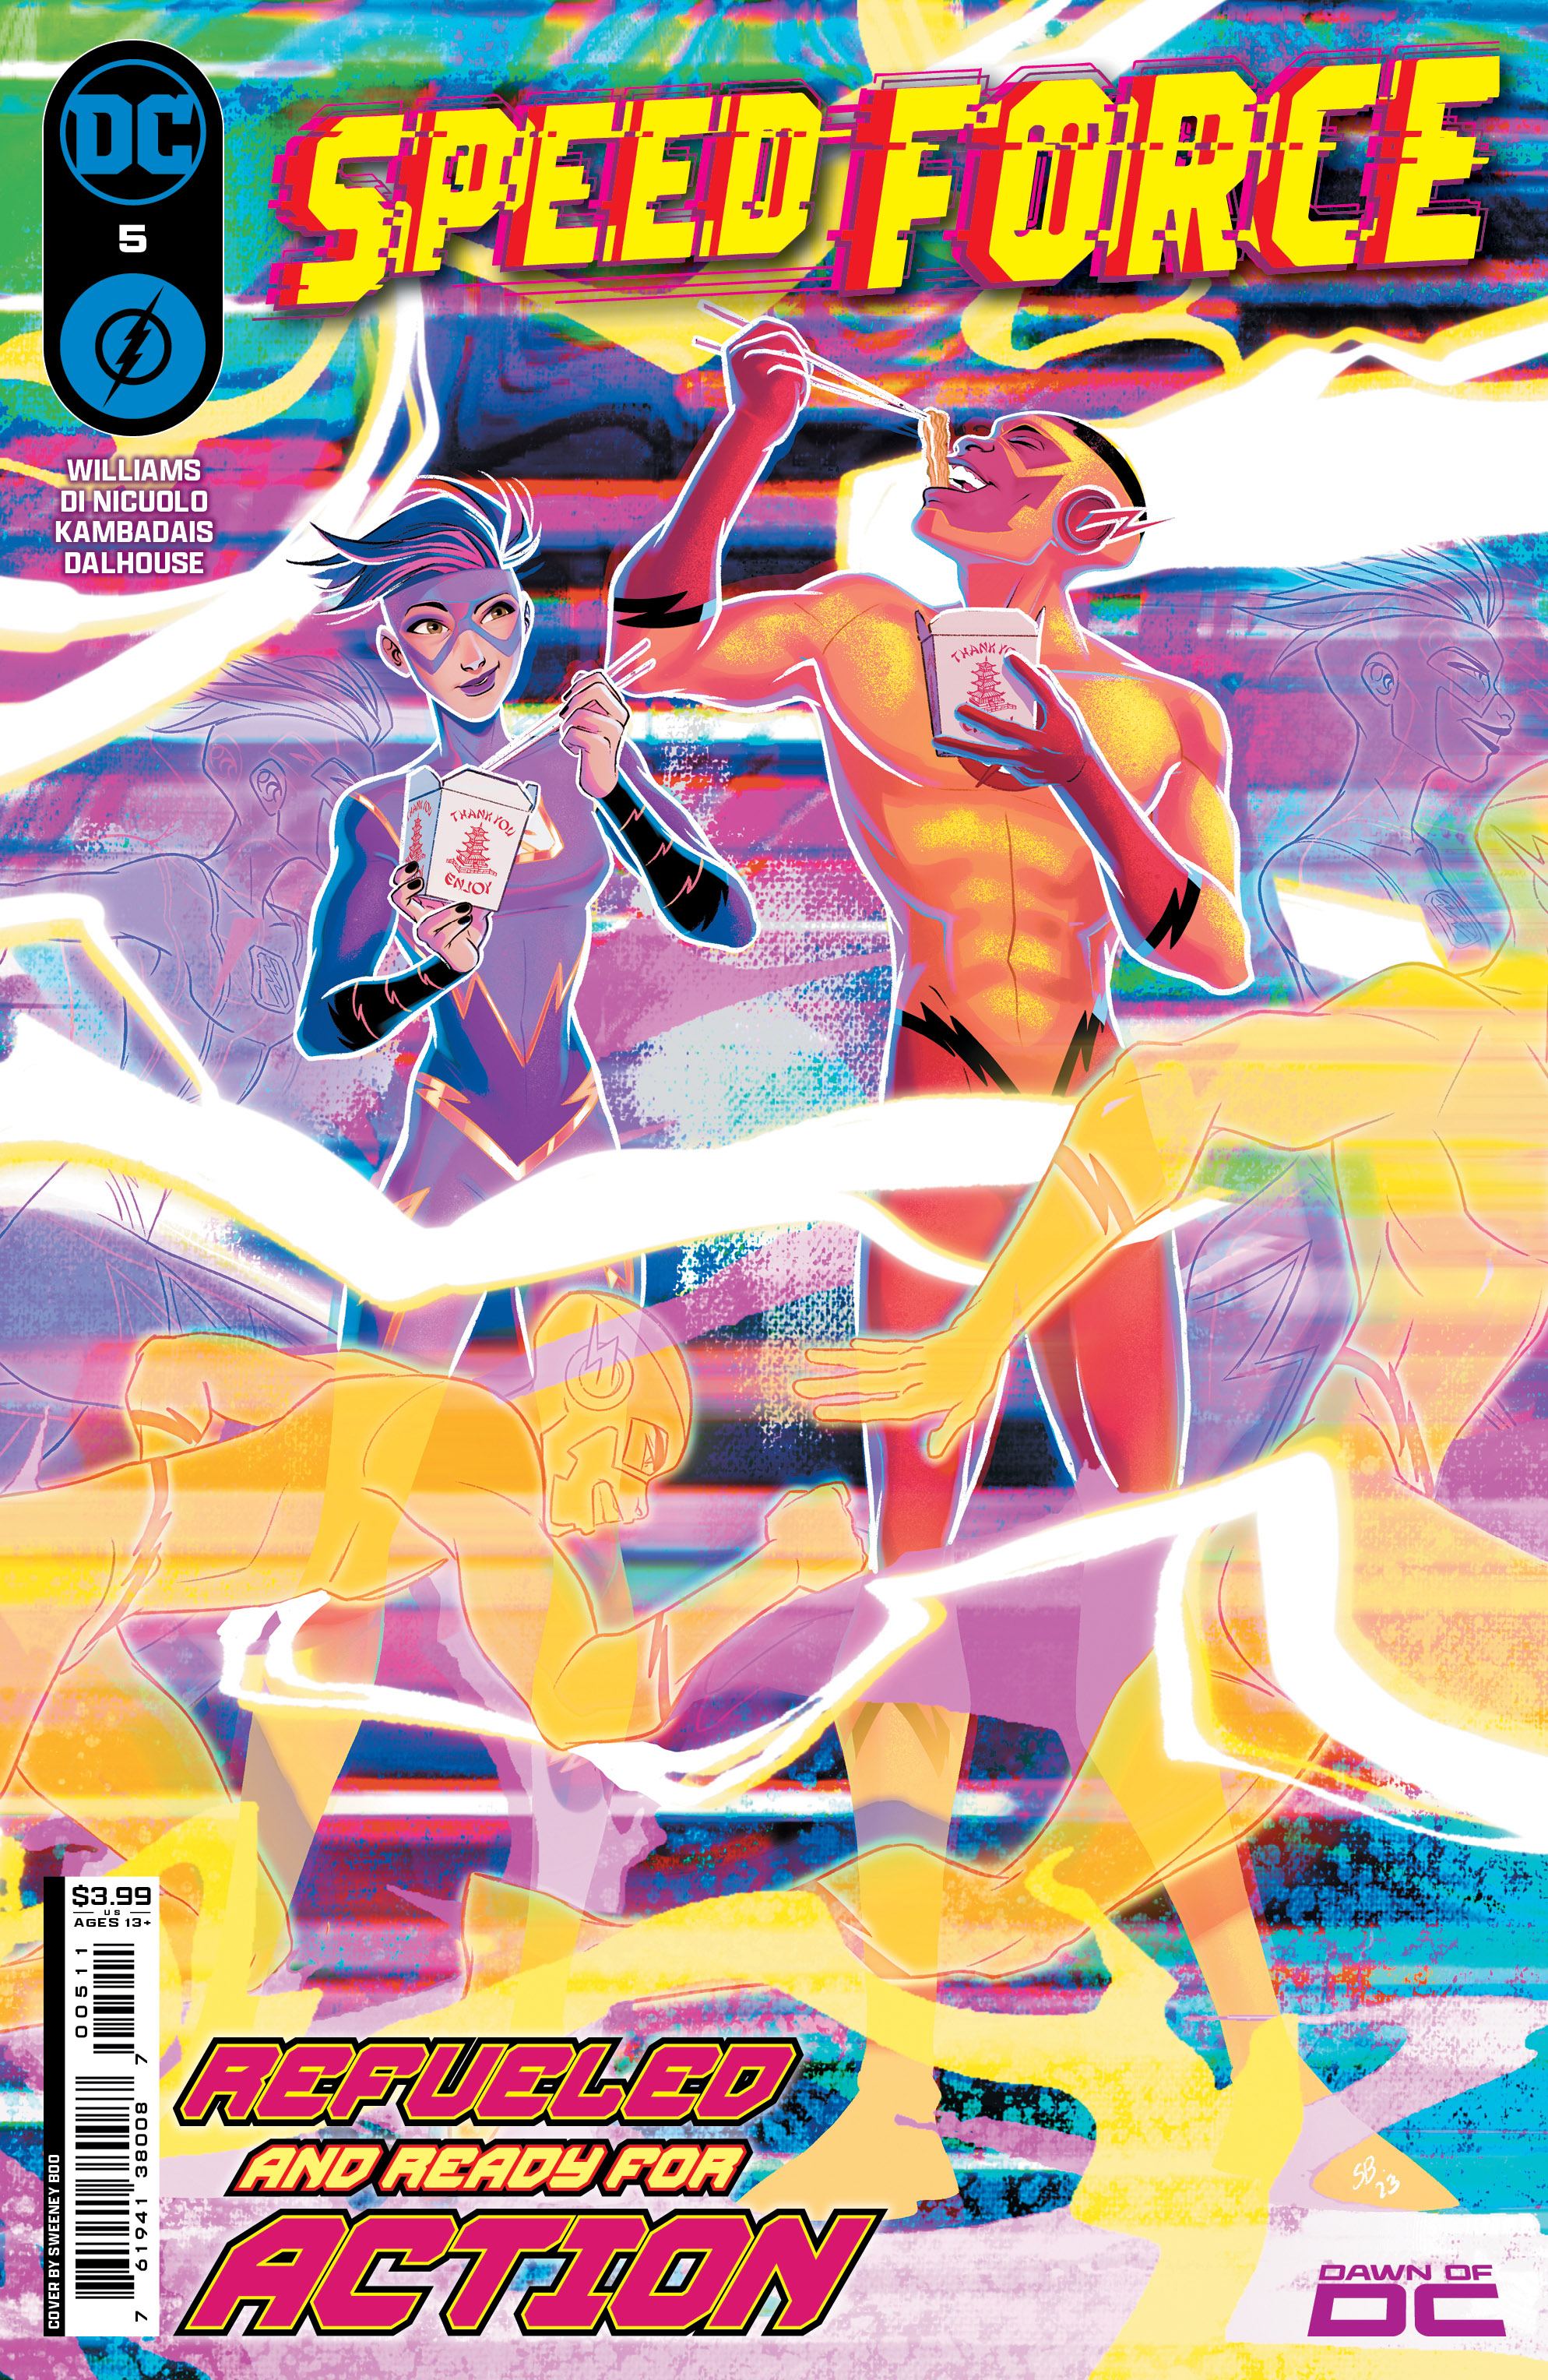 Speed Force #5 Cover A Sweeney Boo (Of 6)